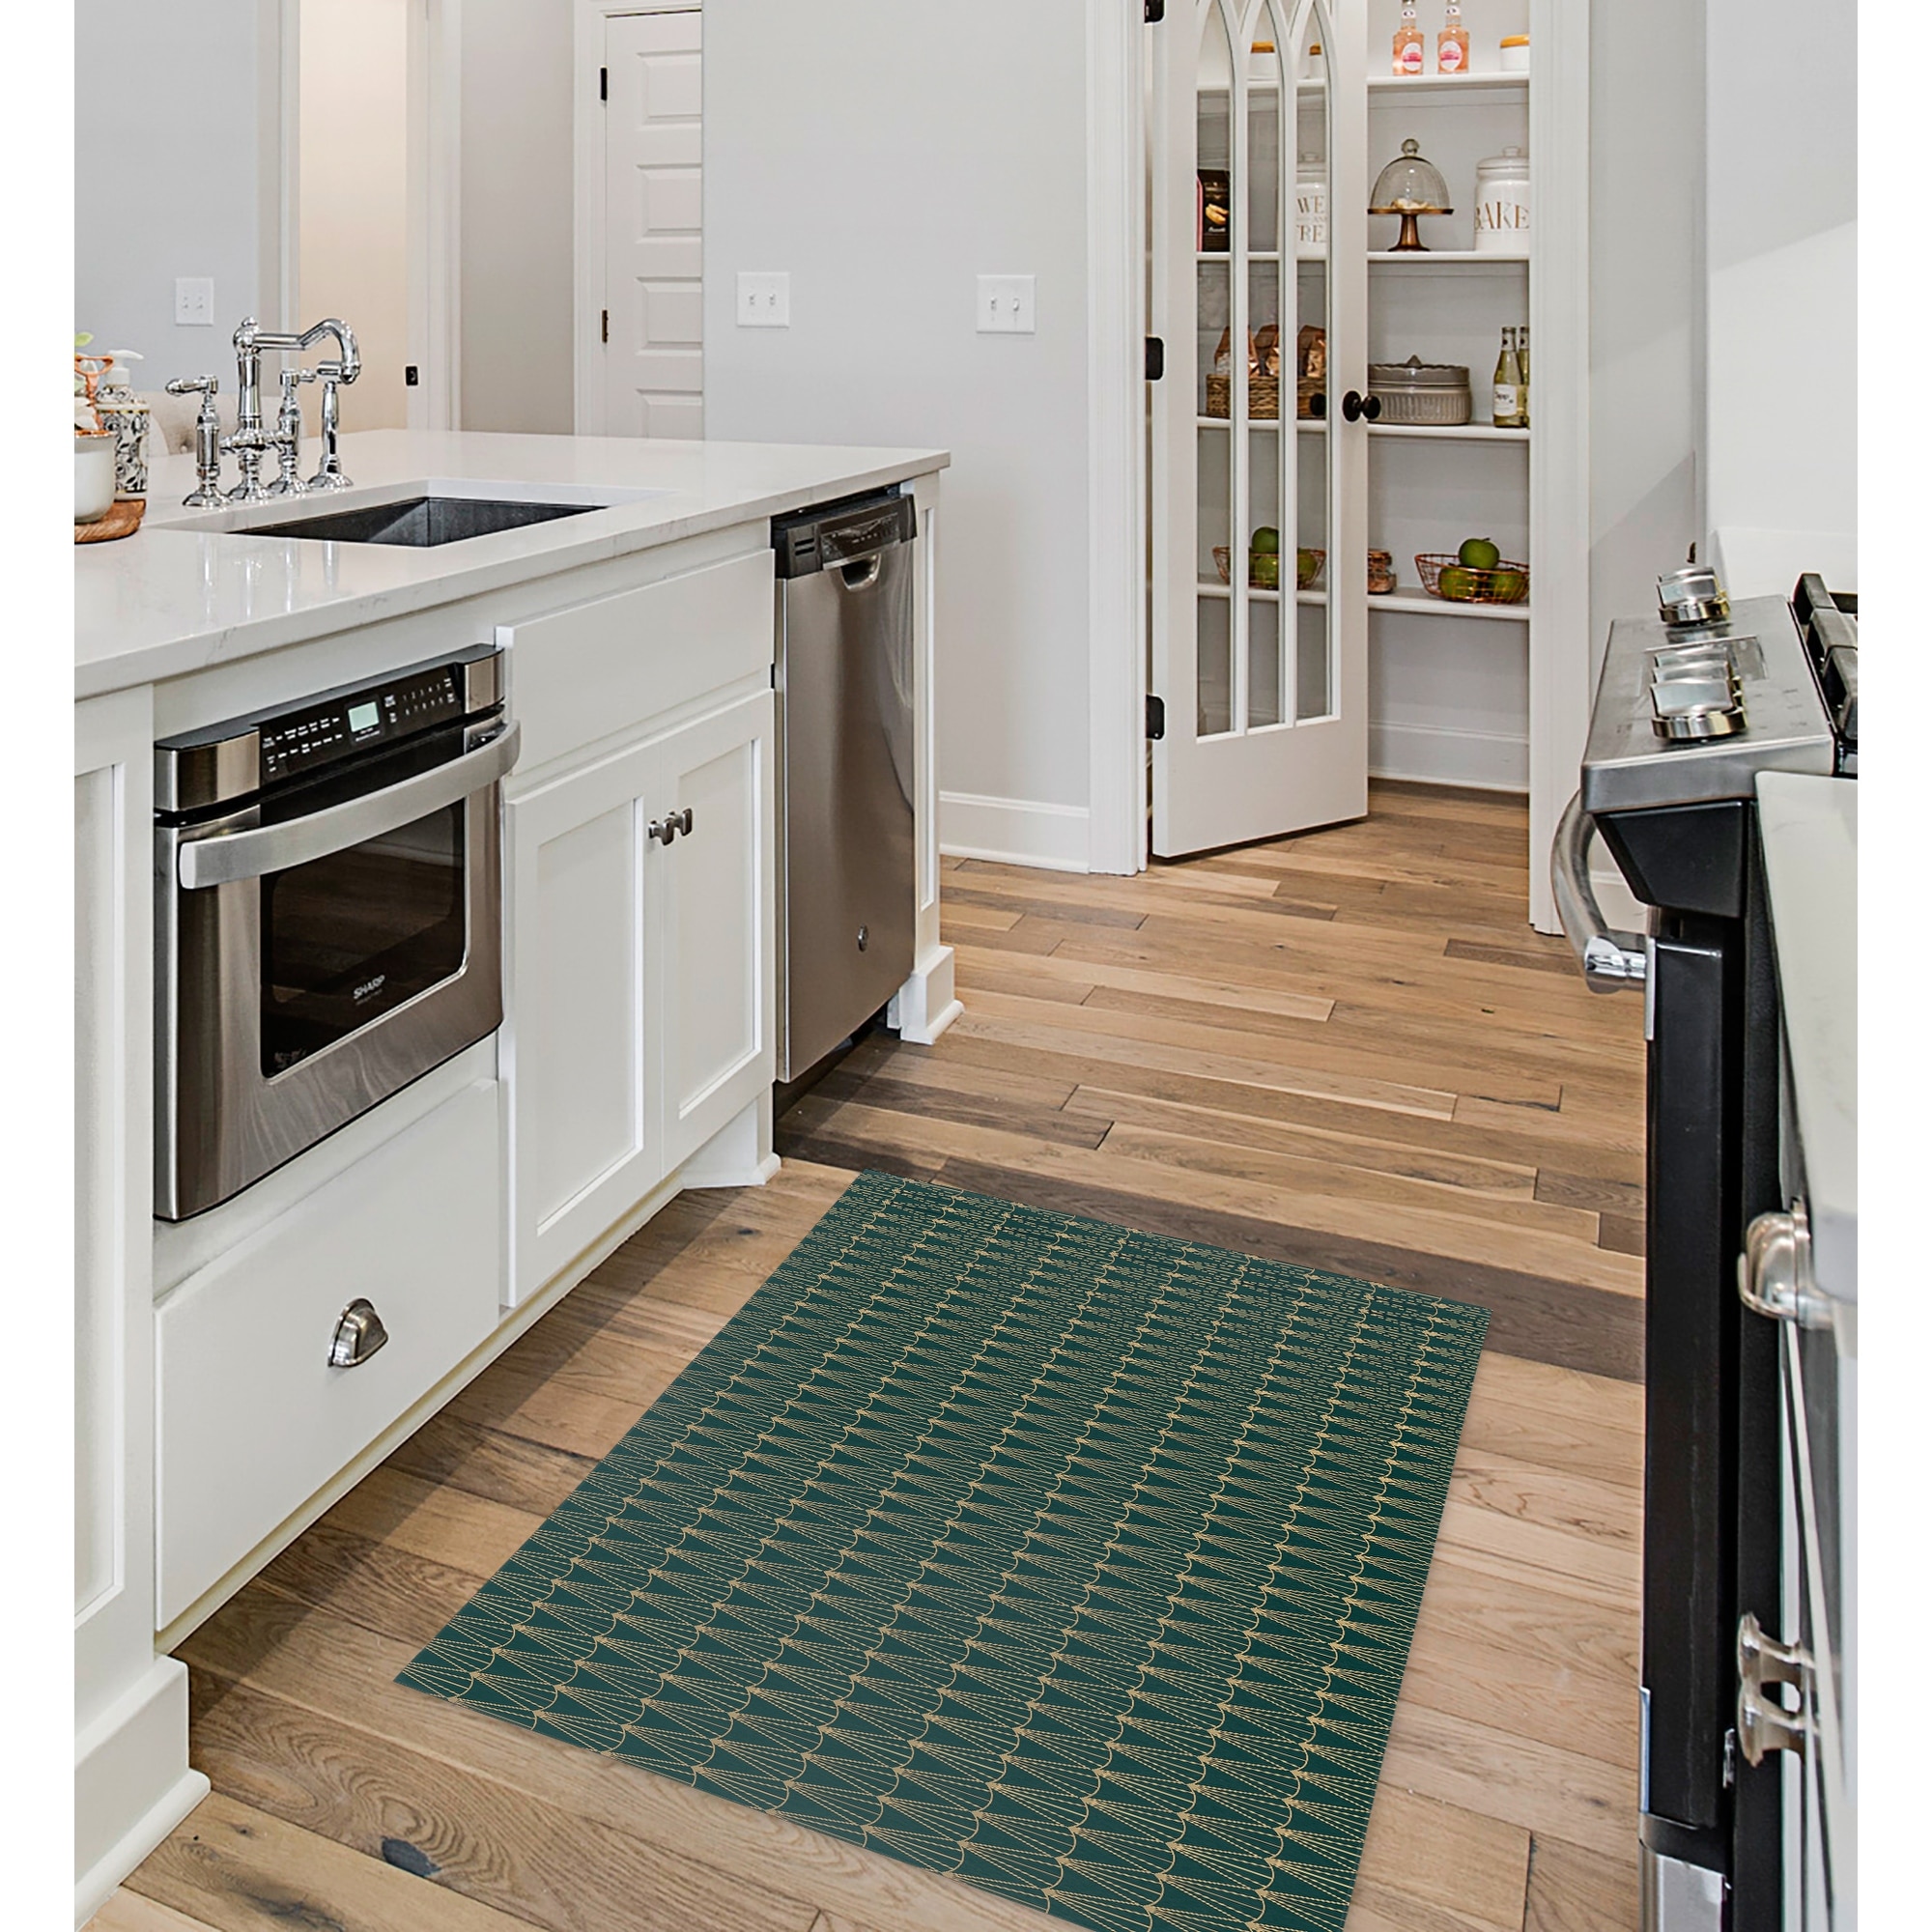 https://ak1.ostkcdn.com/images/products/is/images/direct/47ae1456de1e8f33ca2c7f6fb38c5a31ca6ea187/ART-DECO-RAYS-DARK-GREEN-Kitchen-Mat-By-Becky-Bailey.jpg